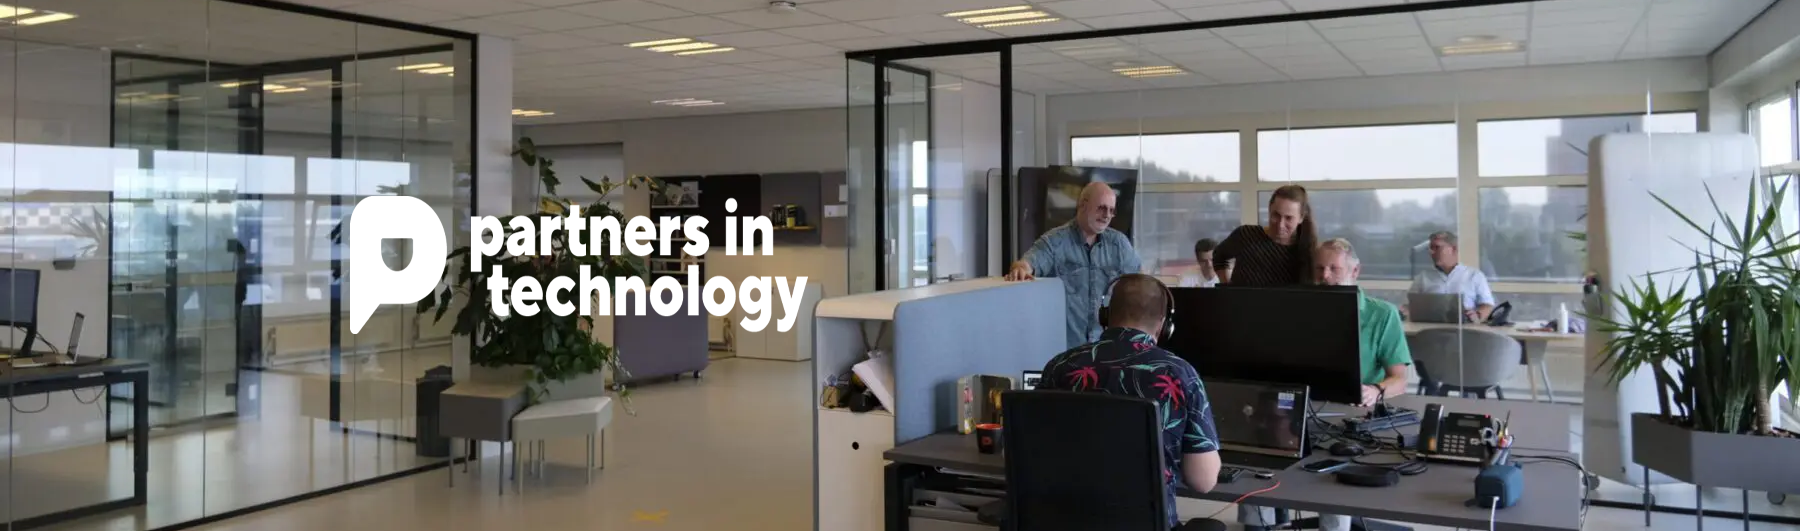 SAP Architect bij Partners In Technology in Duiven/Hybride